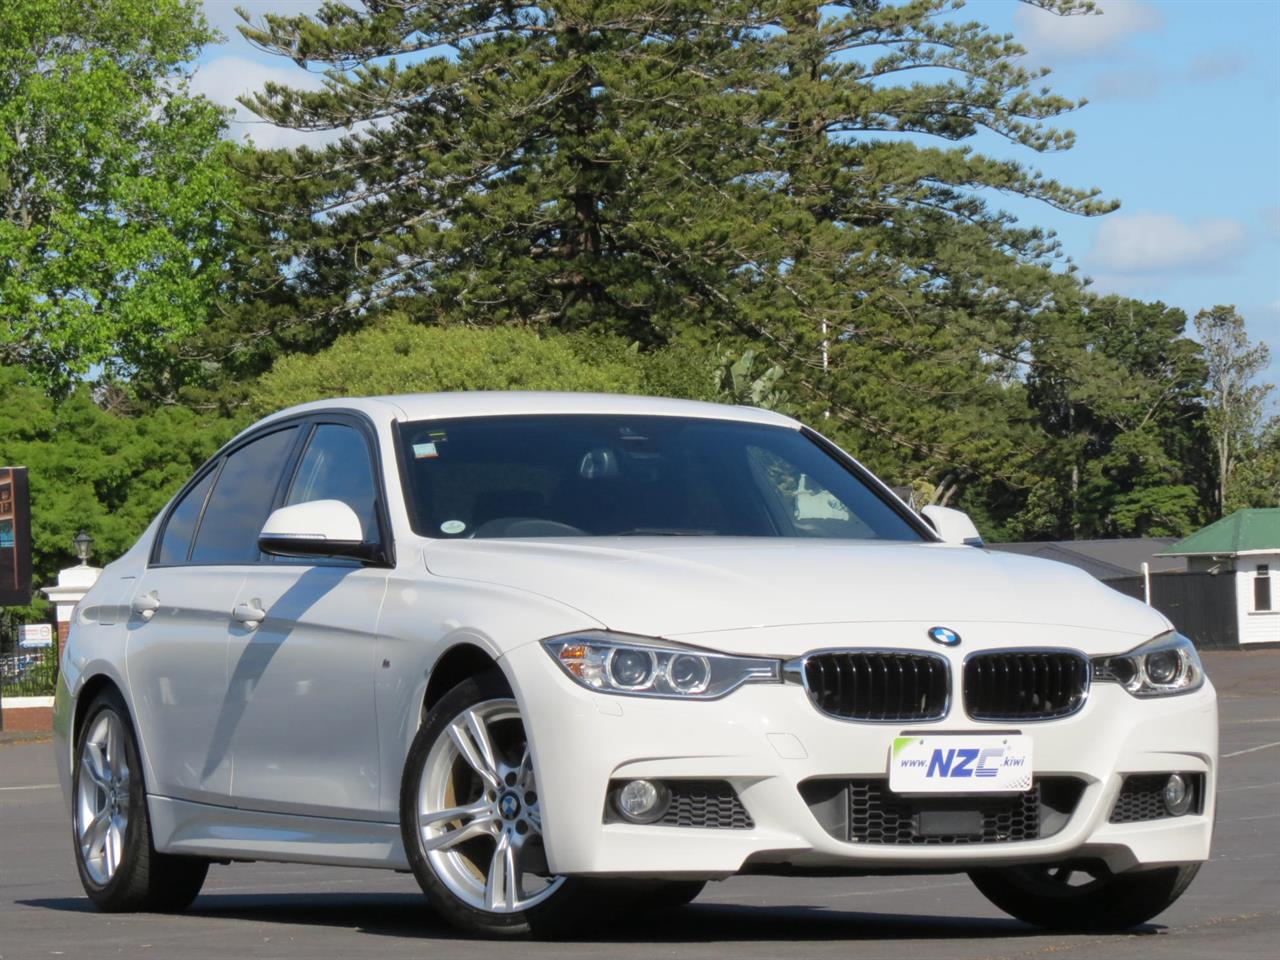 NZC best hot price for 2014 BMW 320d in Auckland